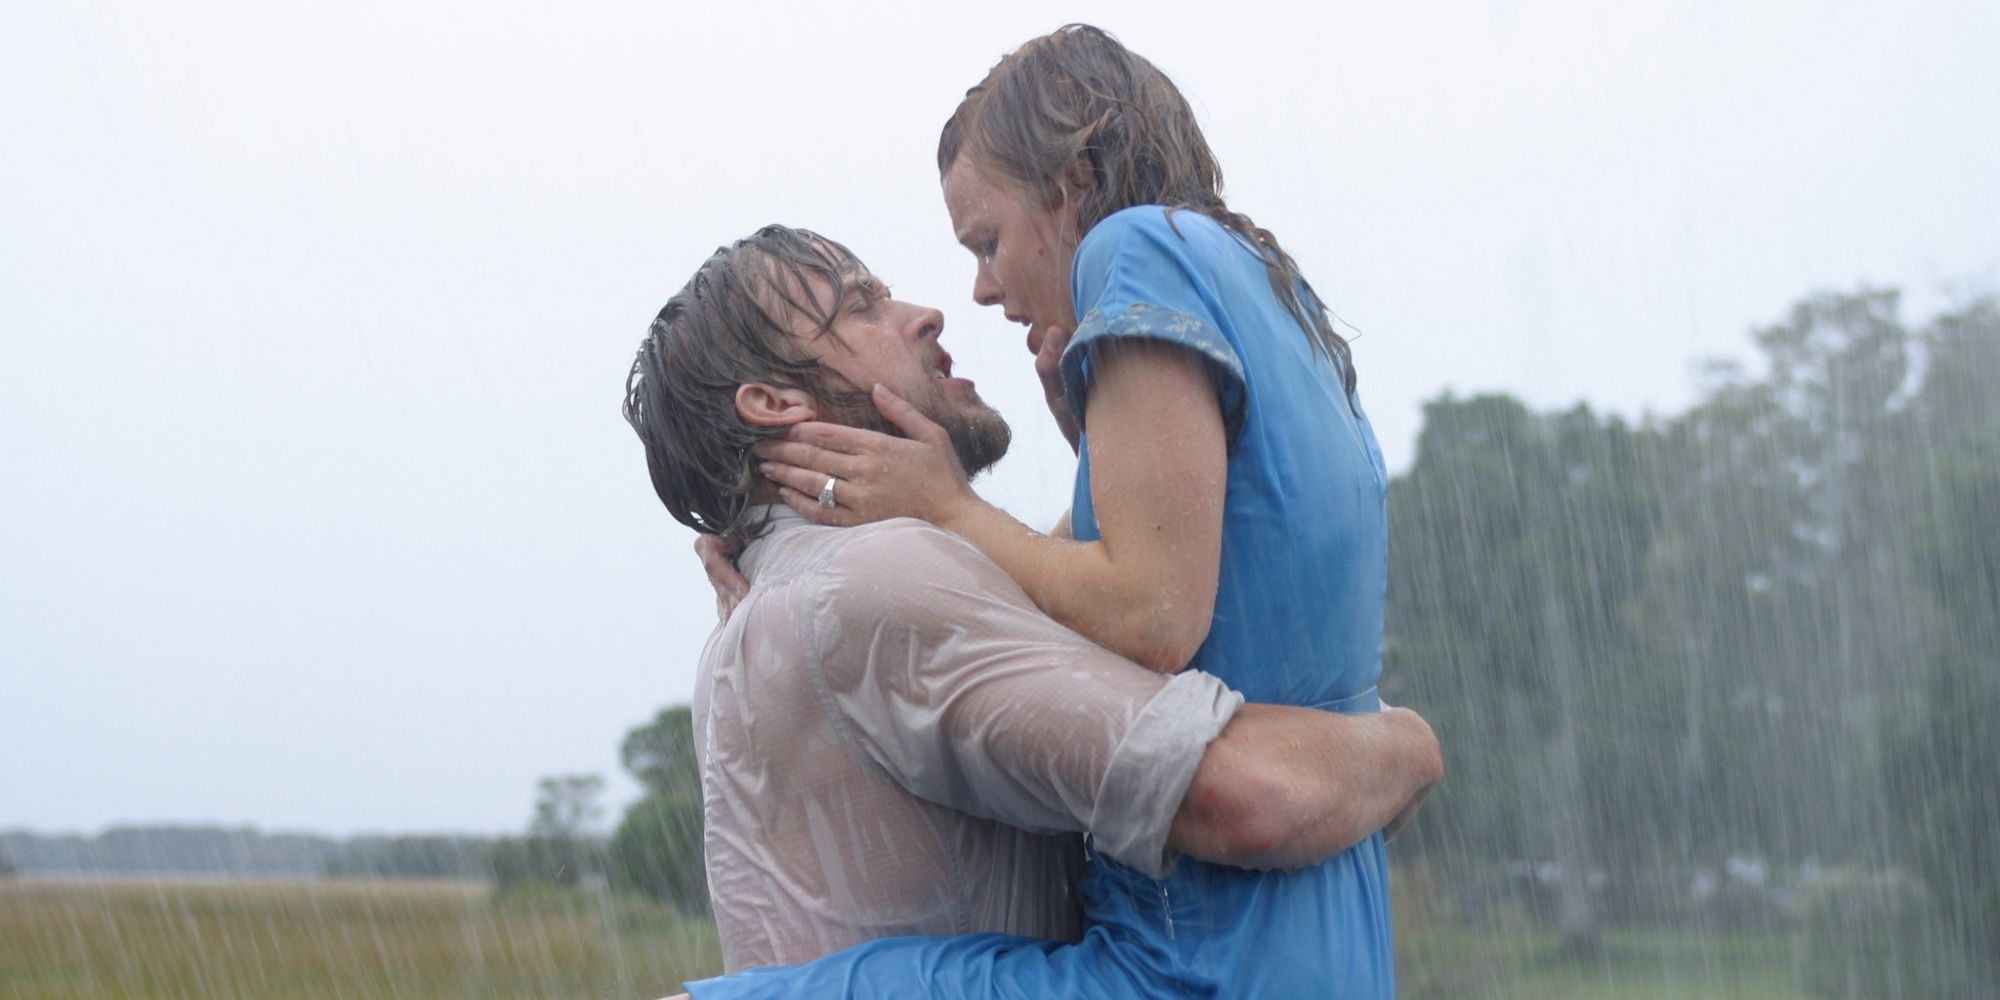 Noah (Ryan Gosling) holding Allie (Rachel McAdams) in his arms as they embrace in the rain in The Notebook.